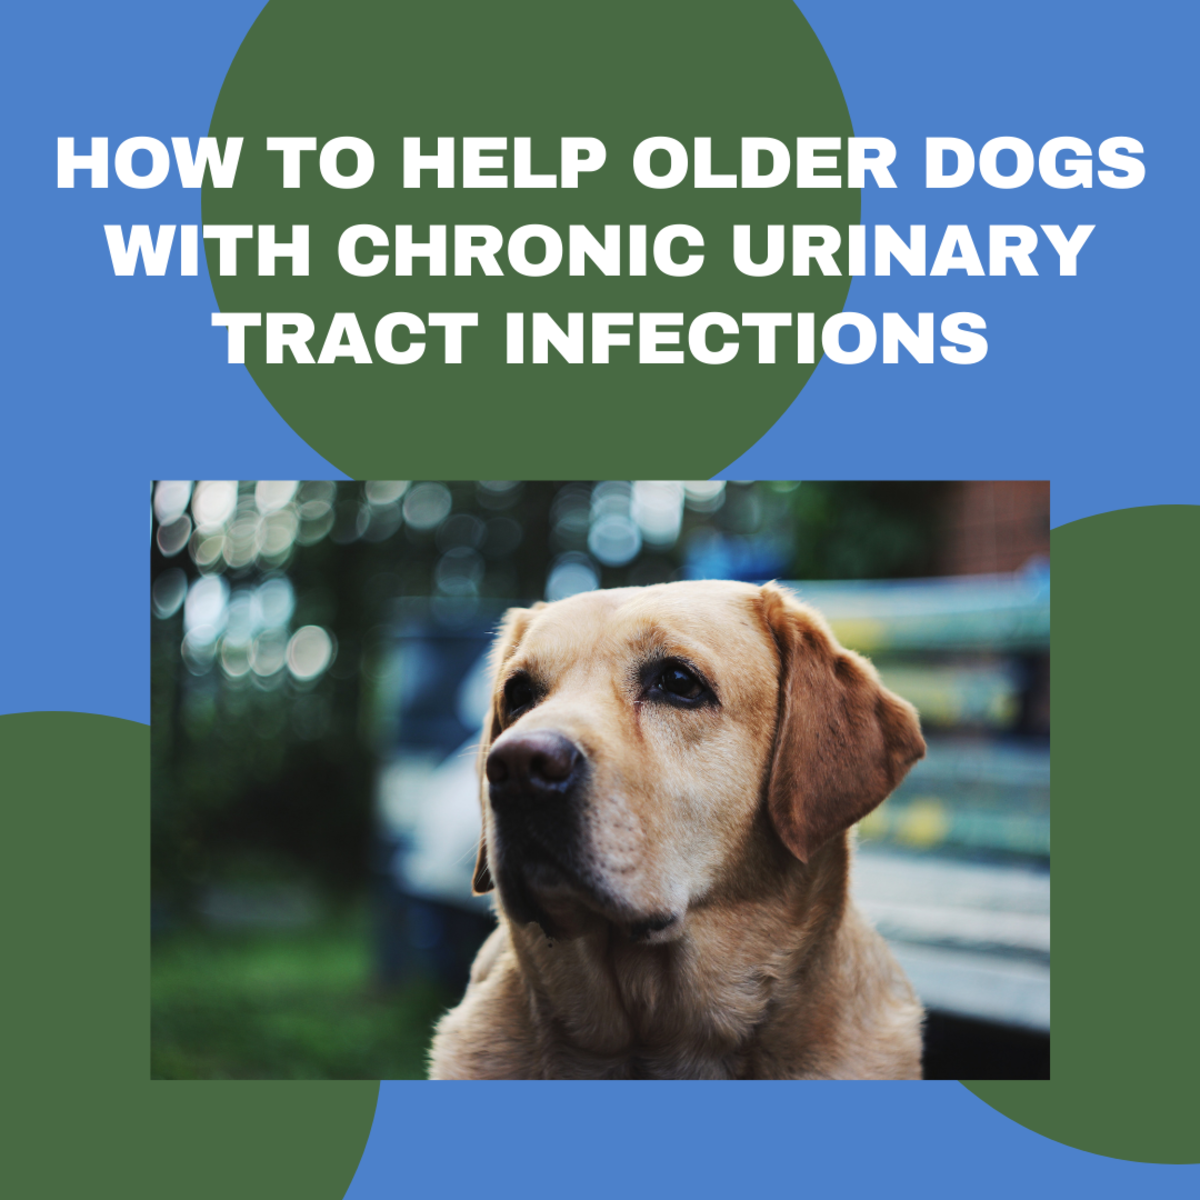 Treating Chronic Urinary Tract Infections in Older Dogs